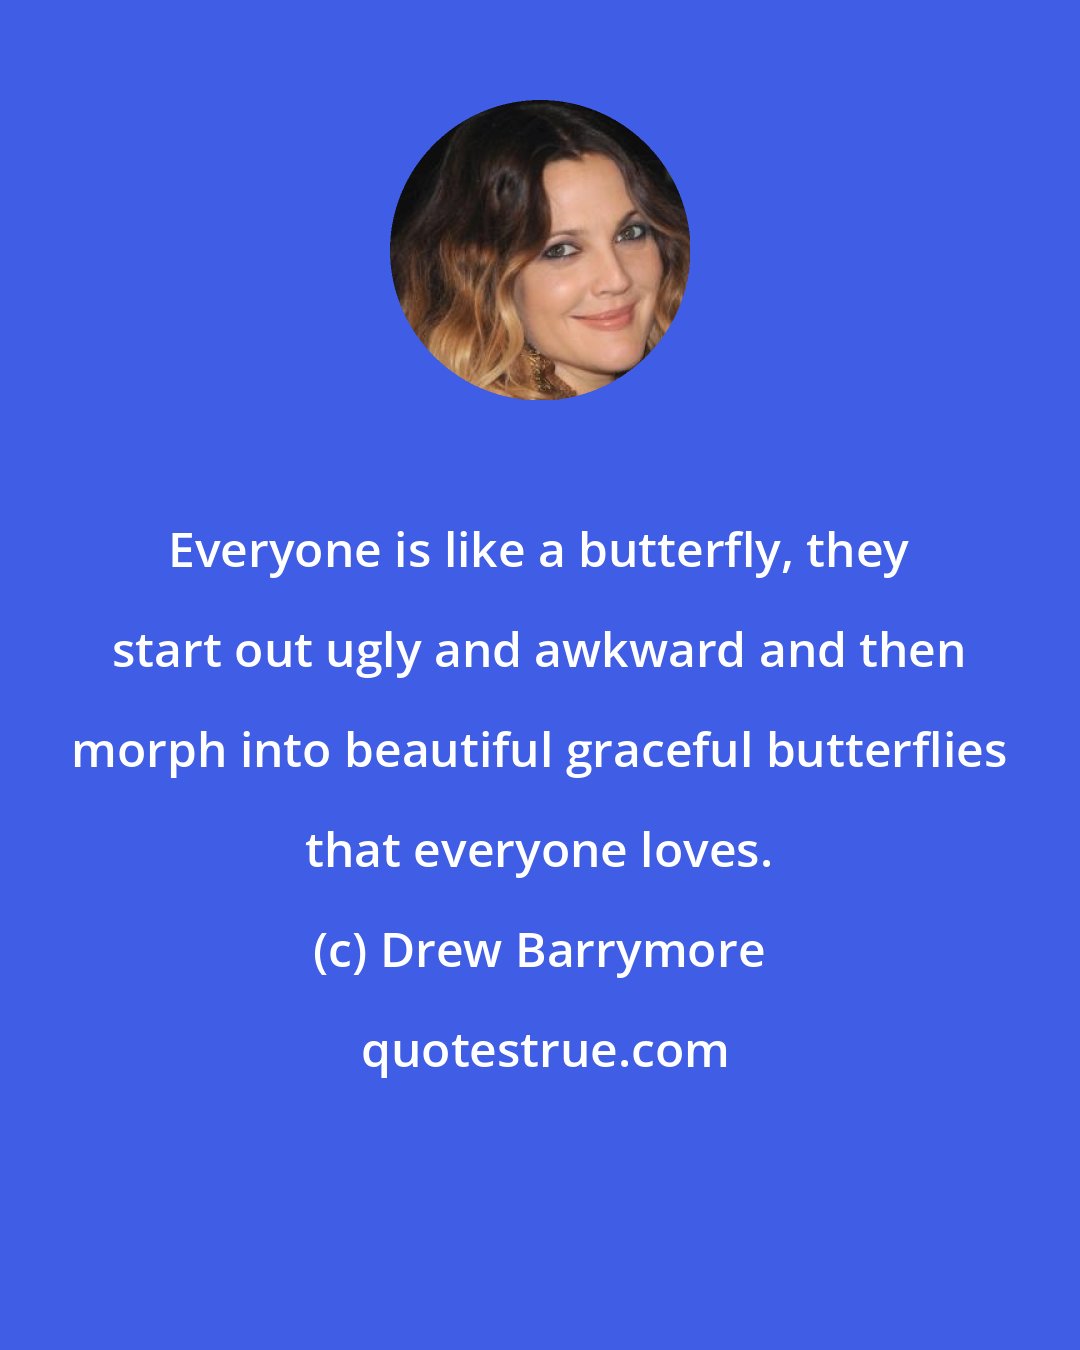 Drew Barrymore: Everyone is like a butterfly, they start out ugly and awkward and then morph into beautiful graceful butterflies that everyone loves.